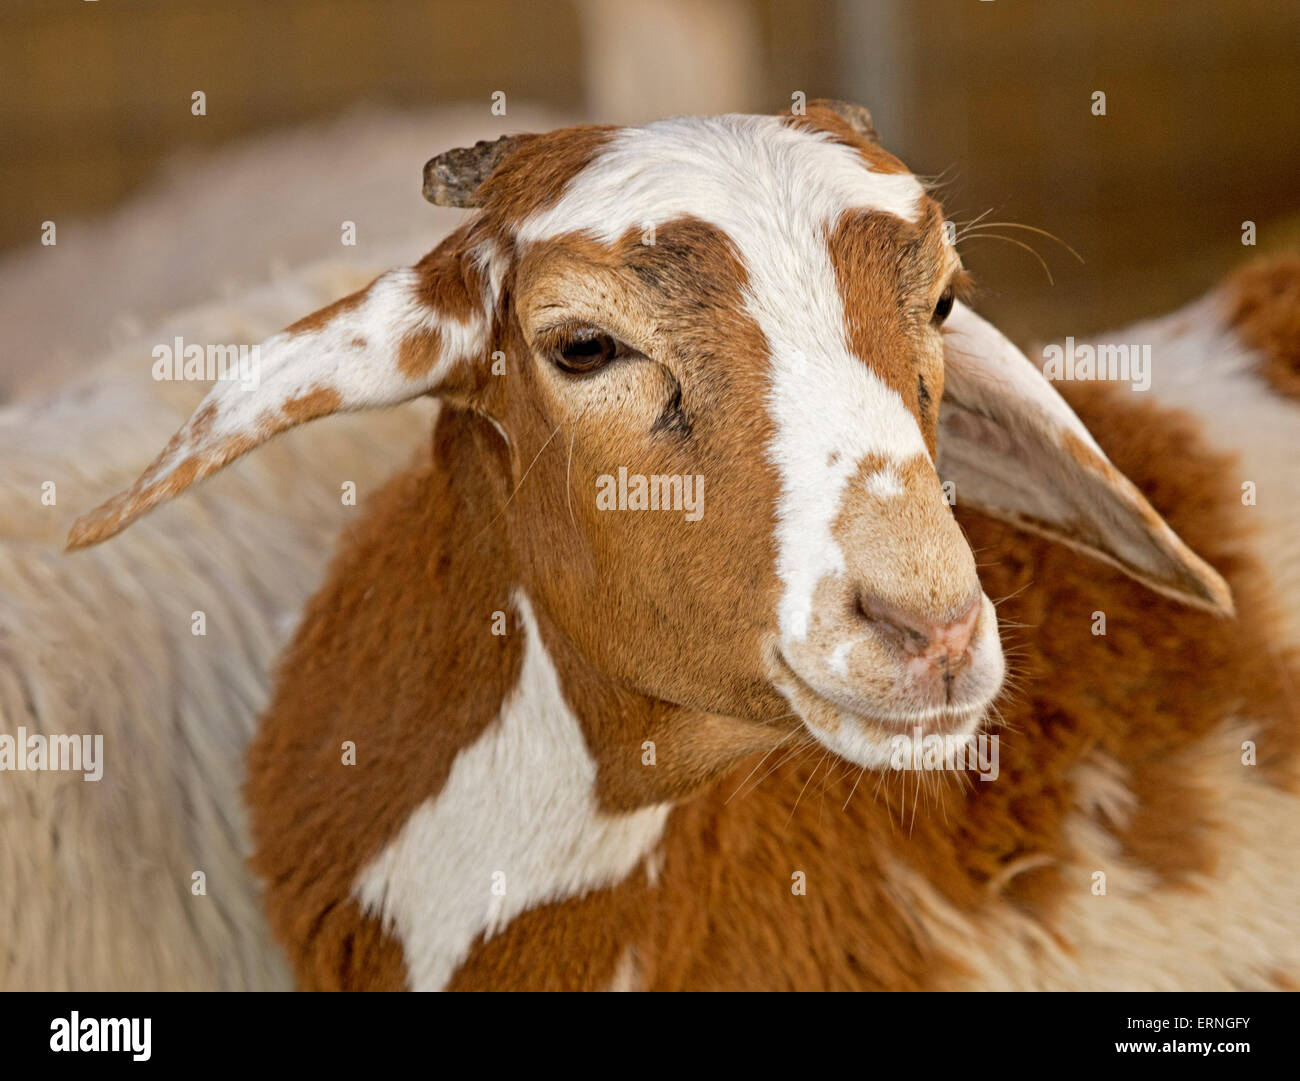 Close-up of face of young brown and white goat kid with long ears on farm in Australia Stock Photo